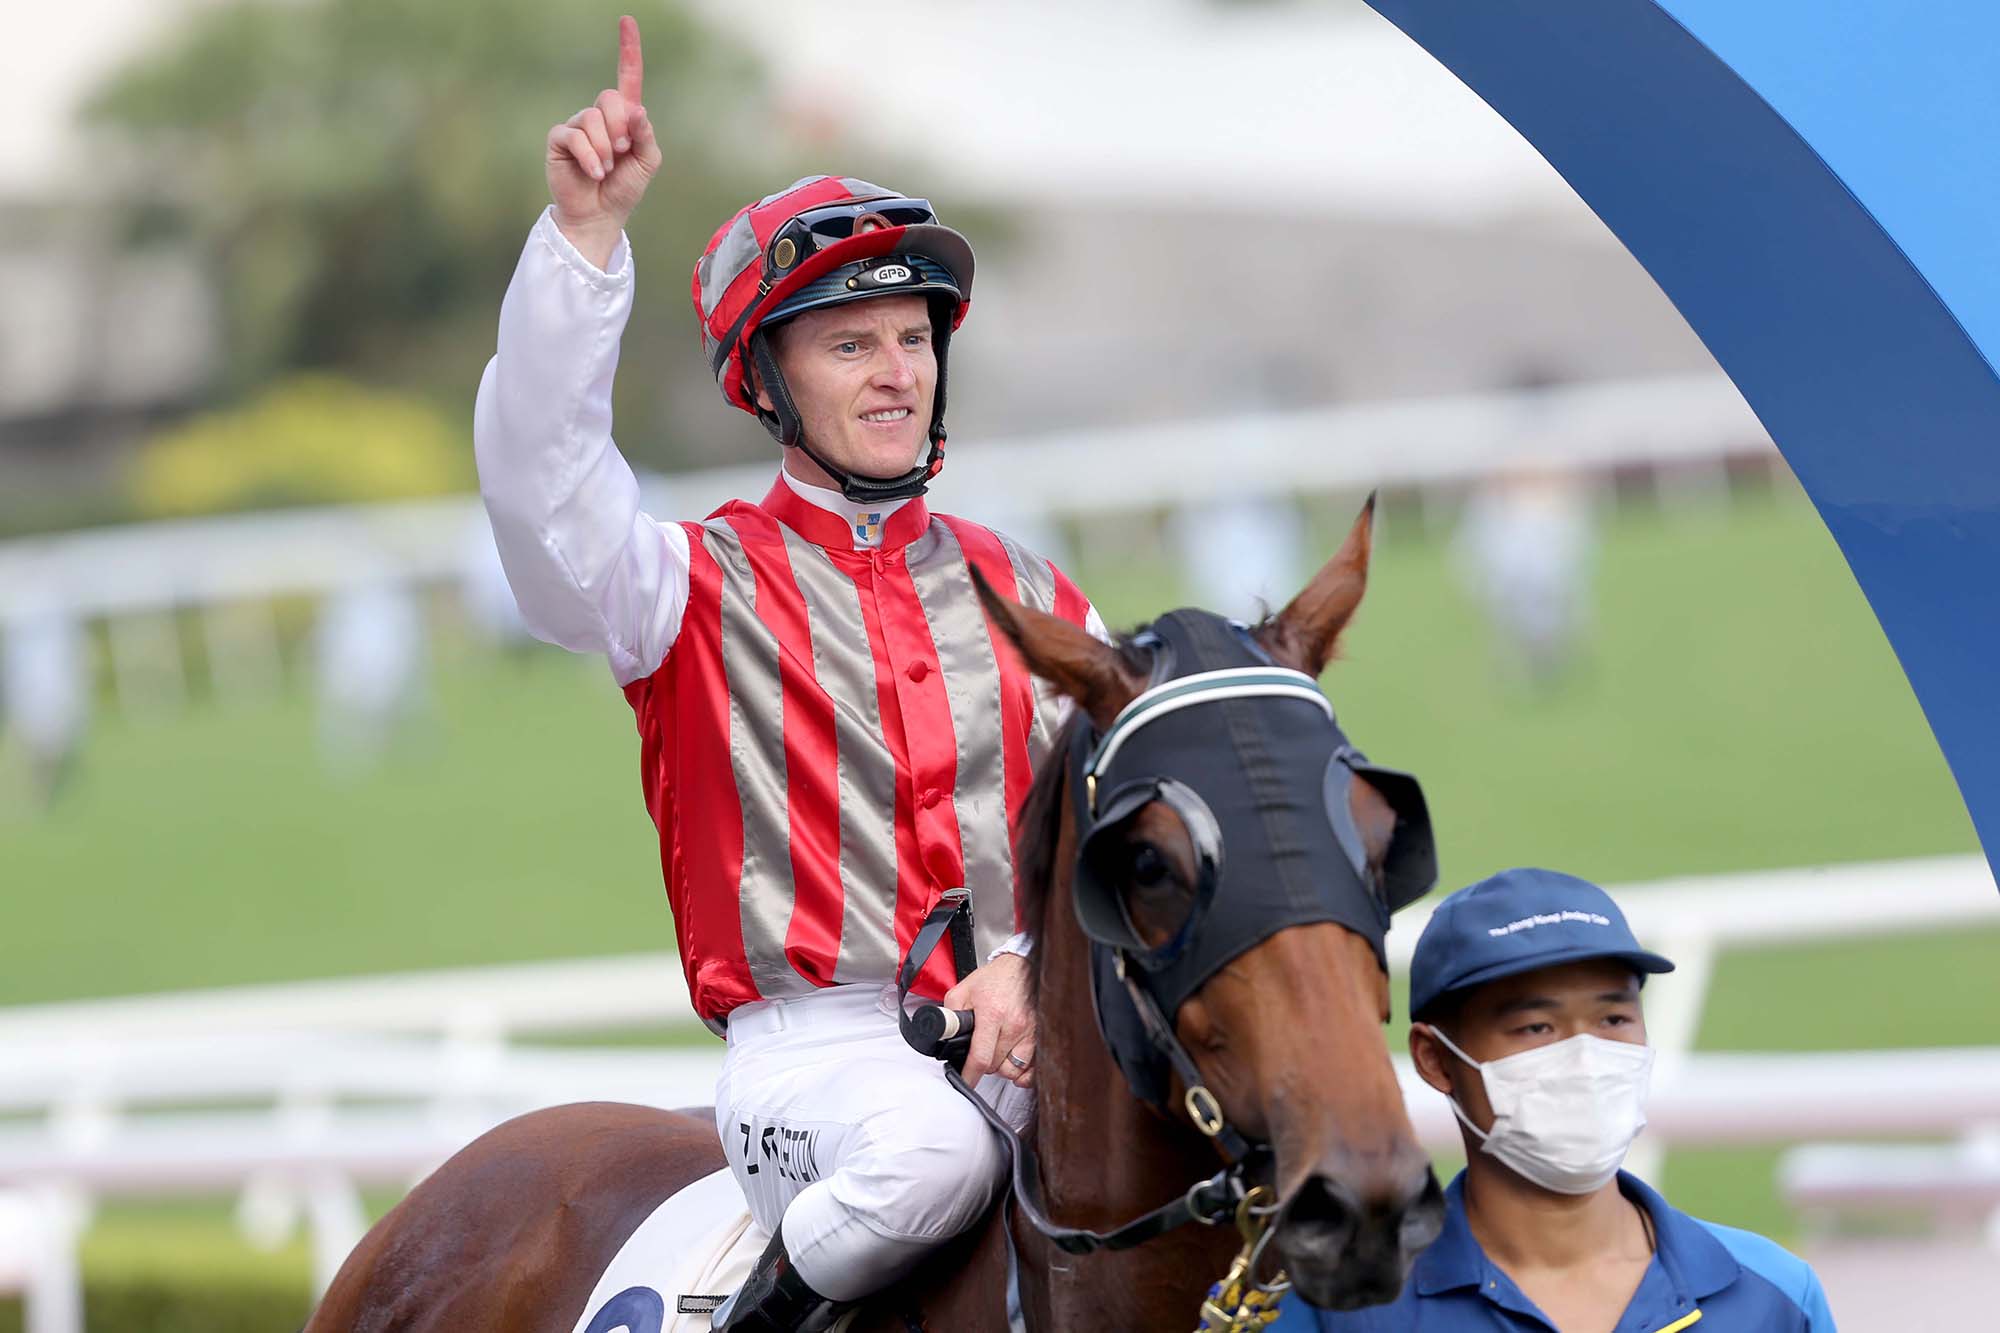 Zac Purton kicked off his title defence with a double at Sha Tin on Sunday.